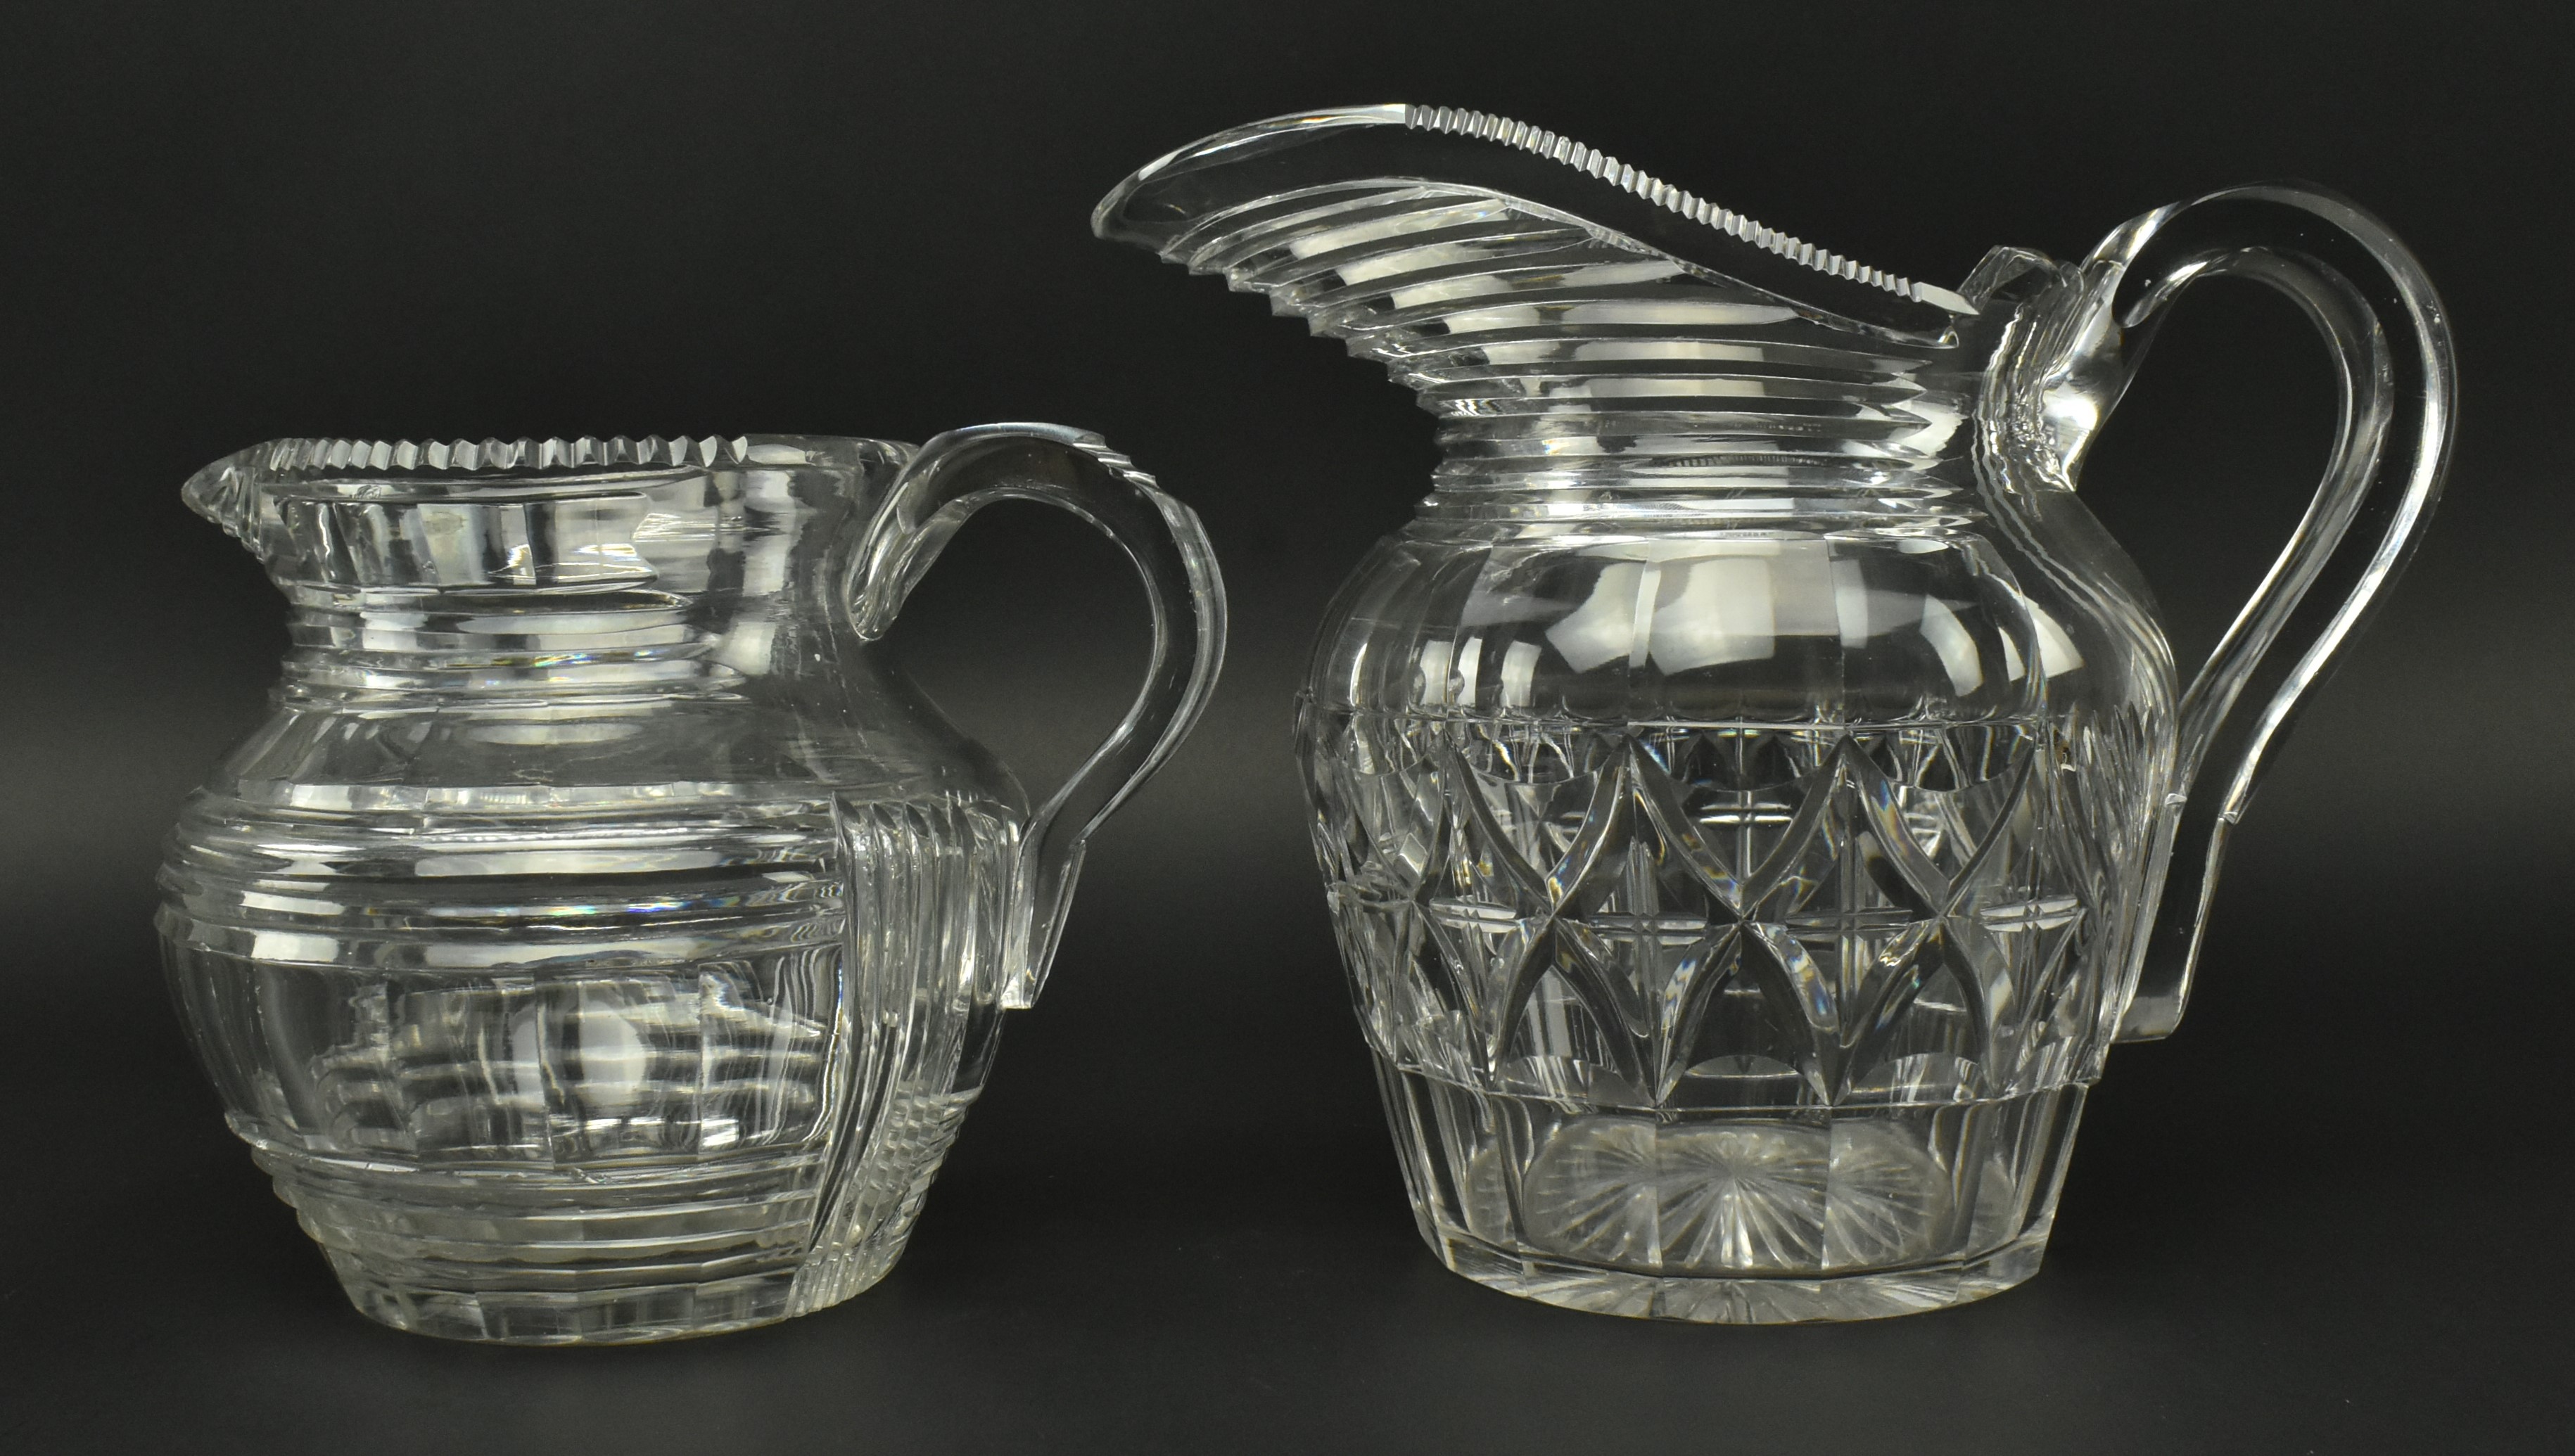 FOUR EARLY 19TH CENTURY GLASS JUGS WITH STEP CUT DESIGN - Image 7 of 11